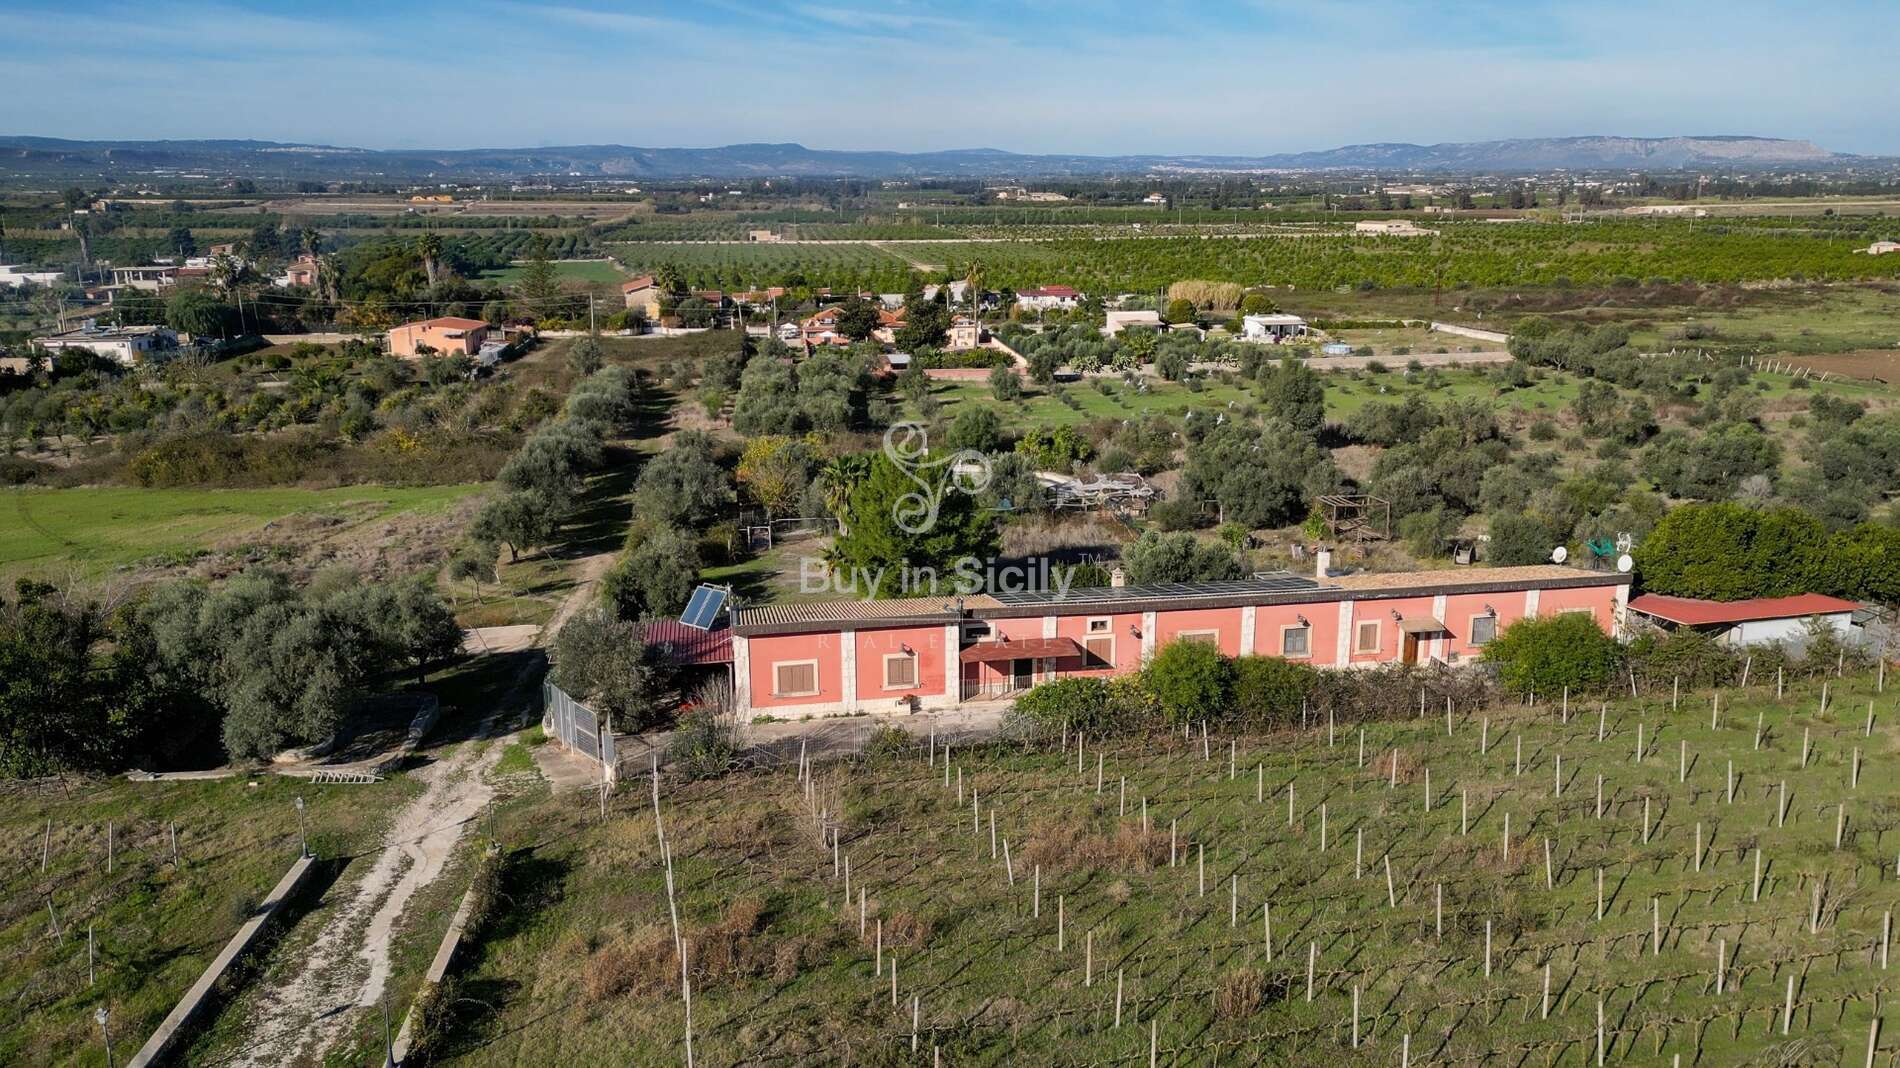 Wonderful land cultivated with vineyards and olive groves with villa and rural buildings, Siracusa.